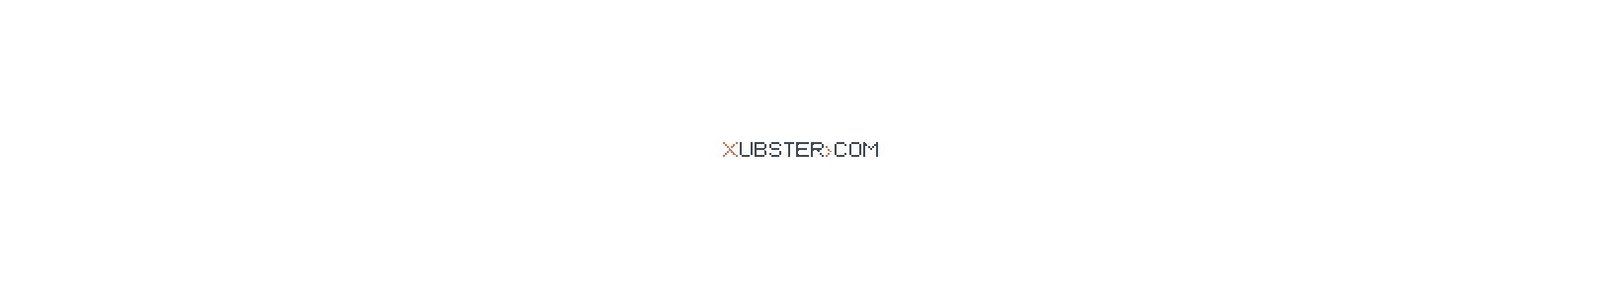 XUBSTER.COM OFFICIAL  RESELLER IN INDIA